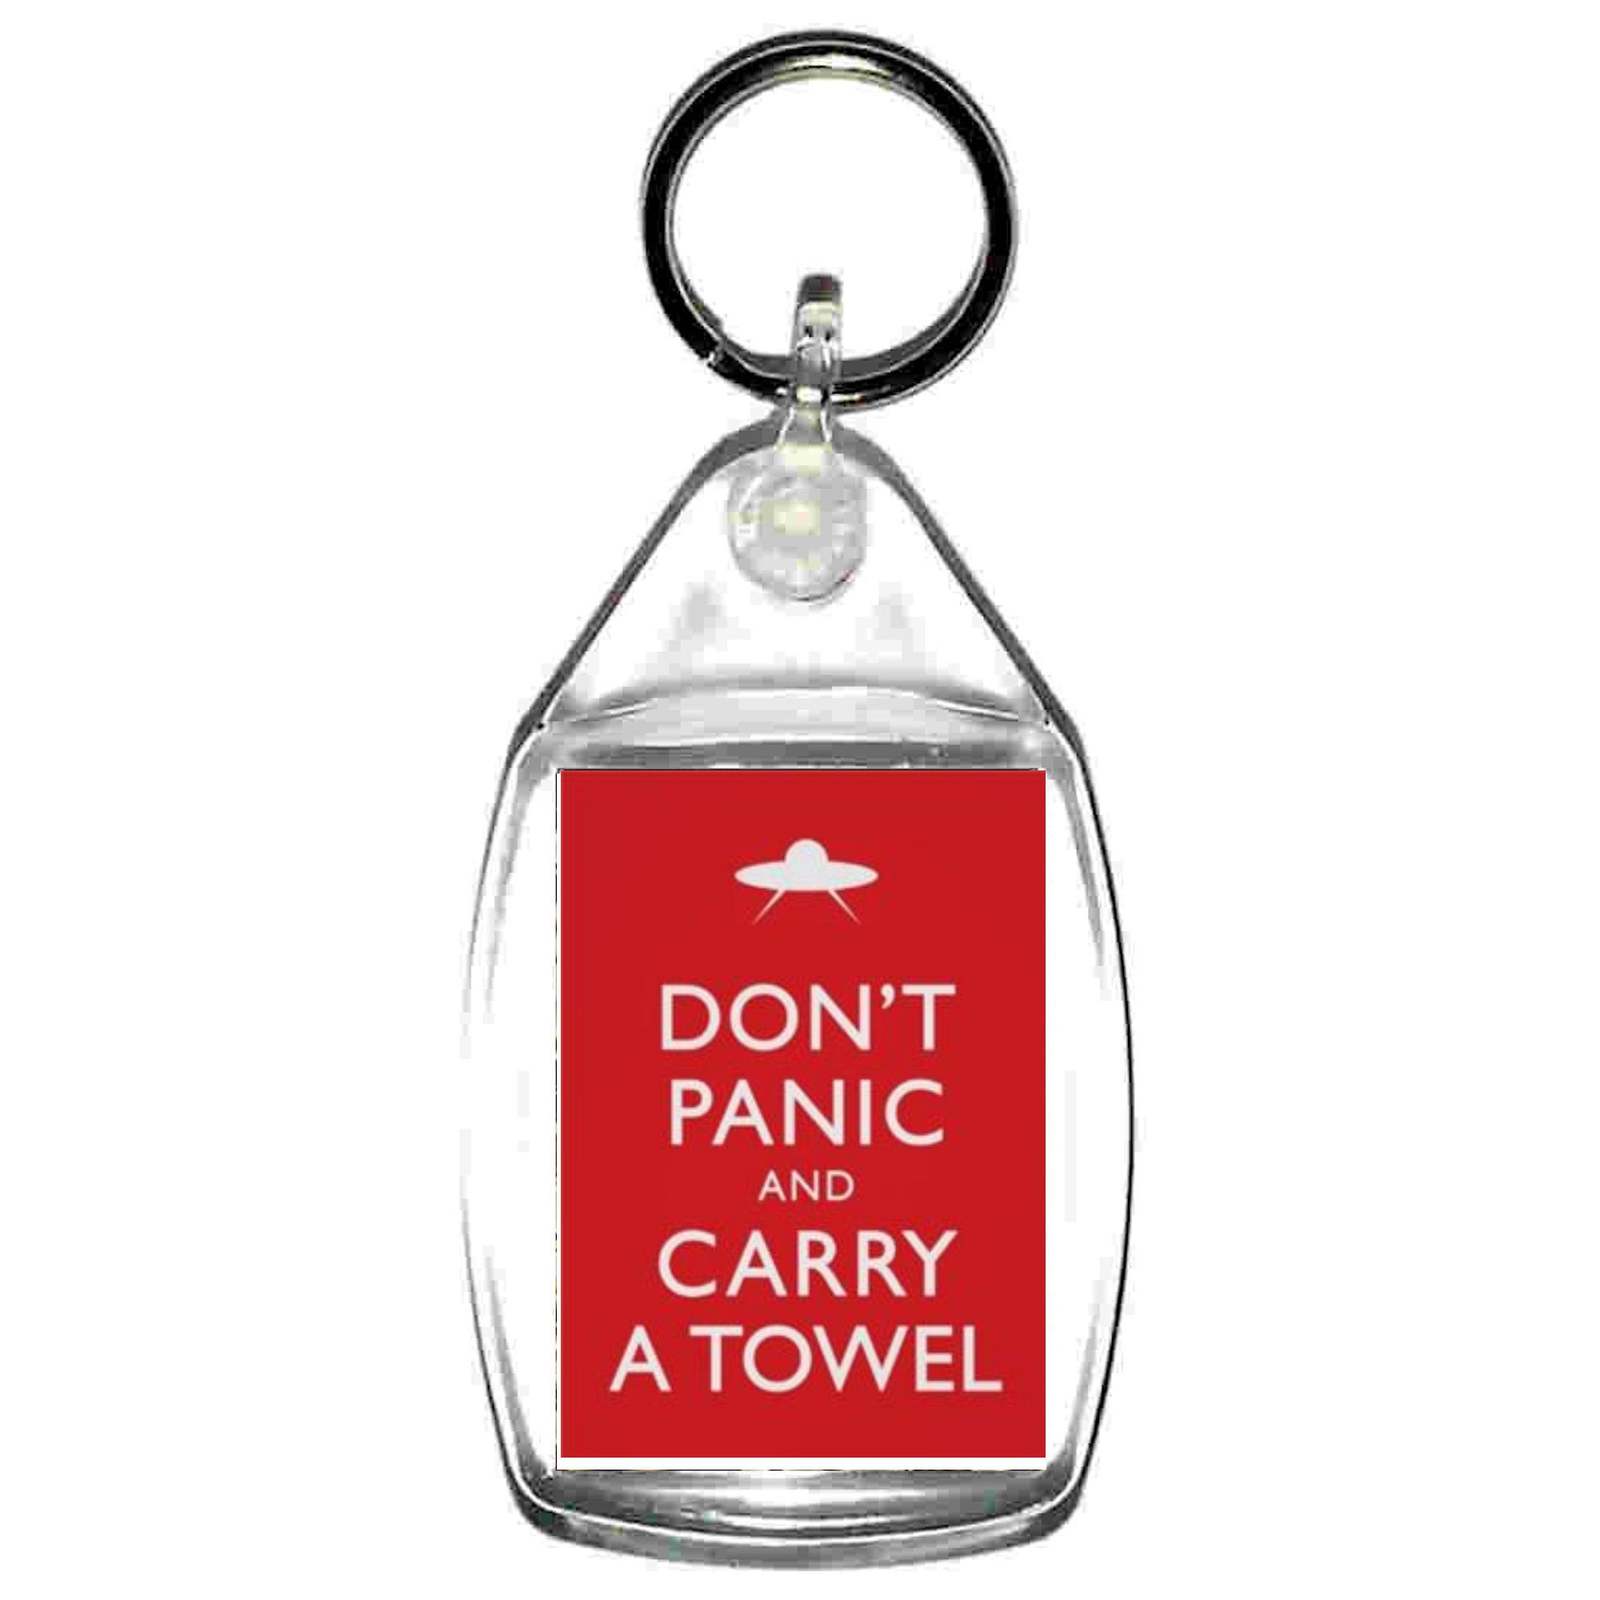 Keyring double sided keep calm carry a towel the vogons are coming design,